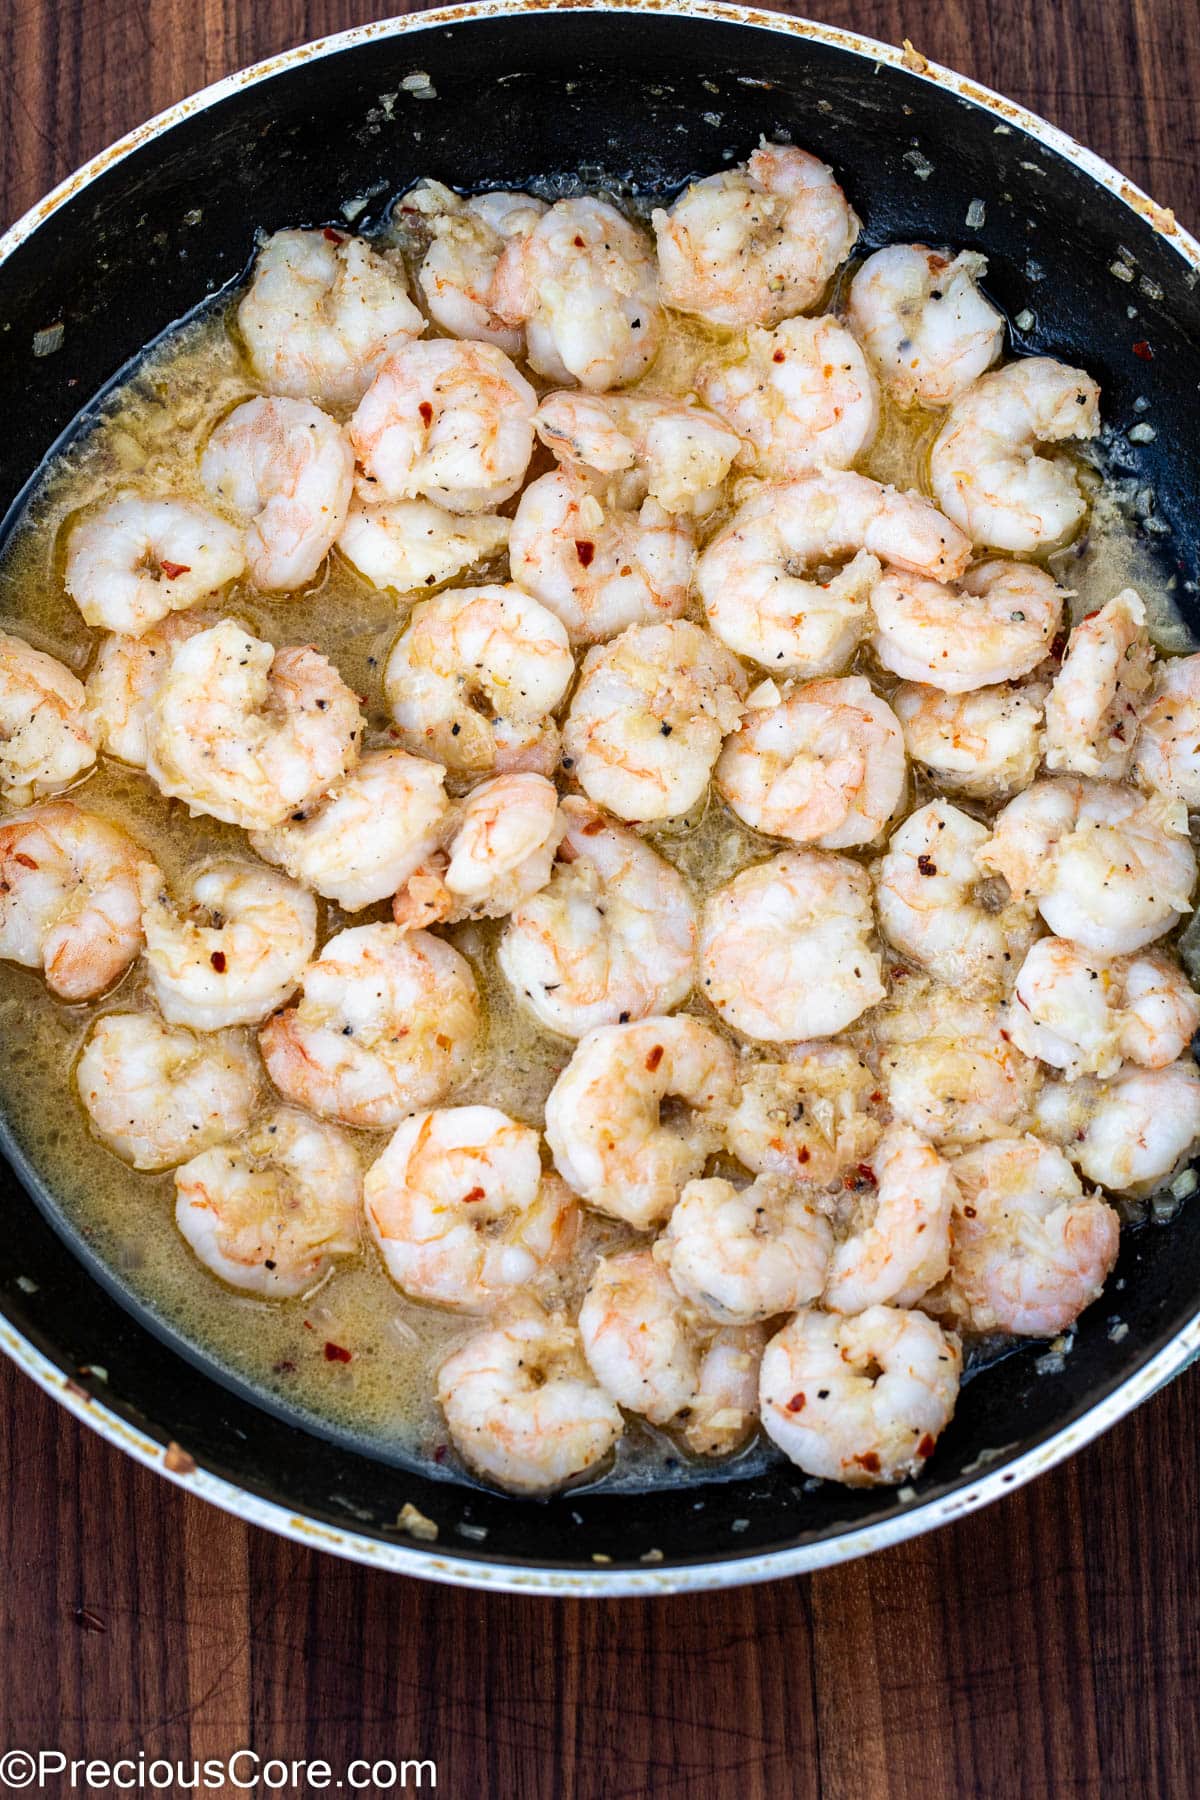 Cooked shrimp in a skillet with white wine sauce.